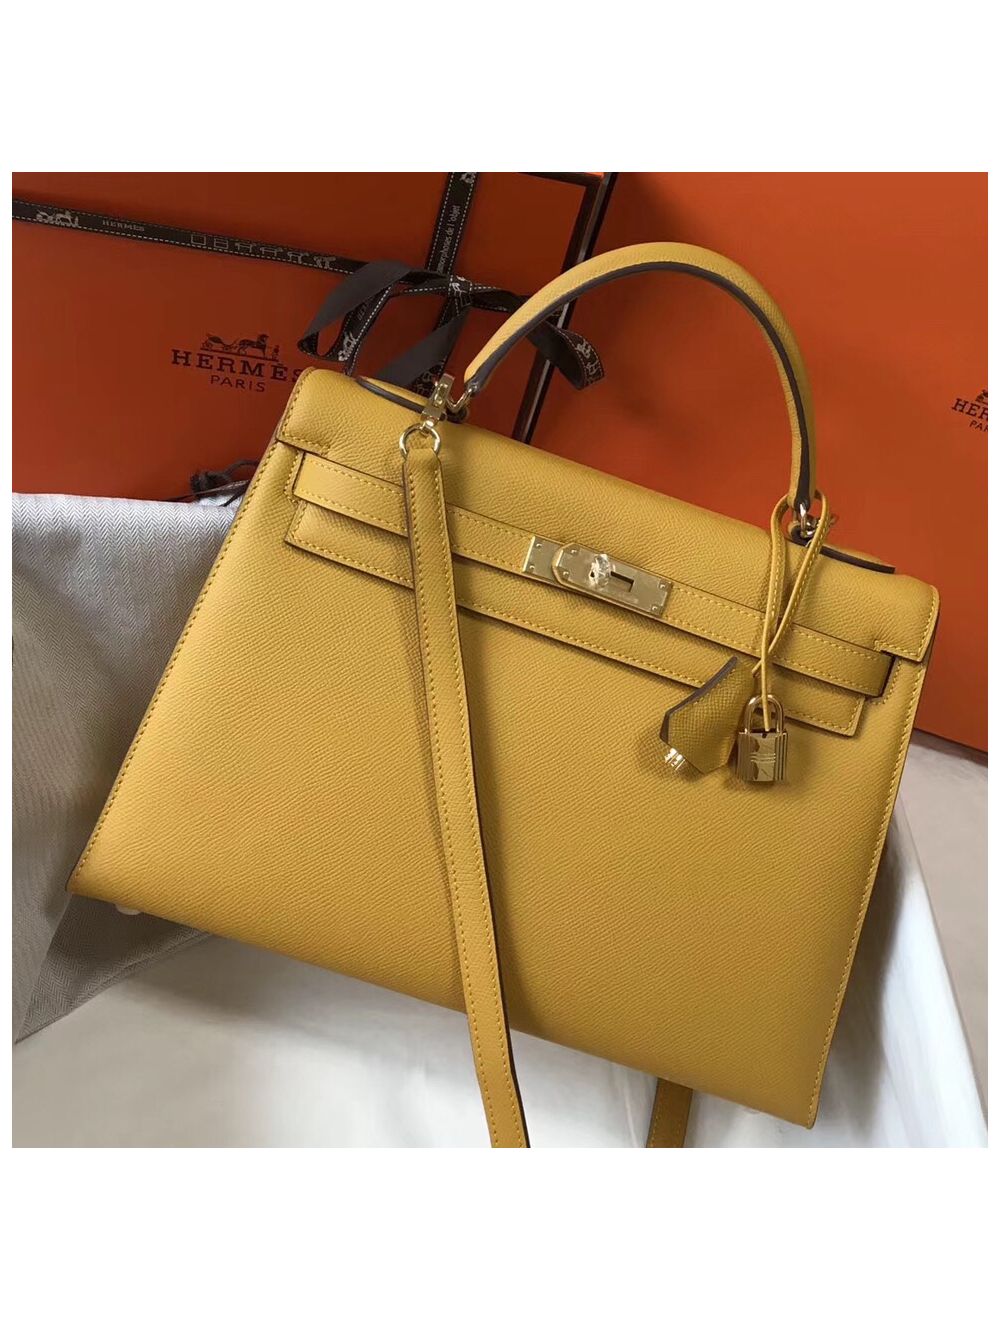 Replica Hermes Kelly 32cm Bag In Yellow Epsom Leather GHW